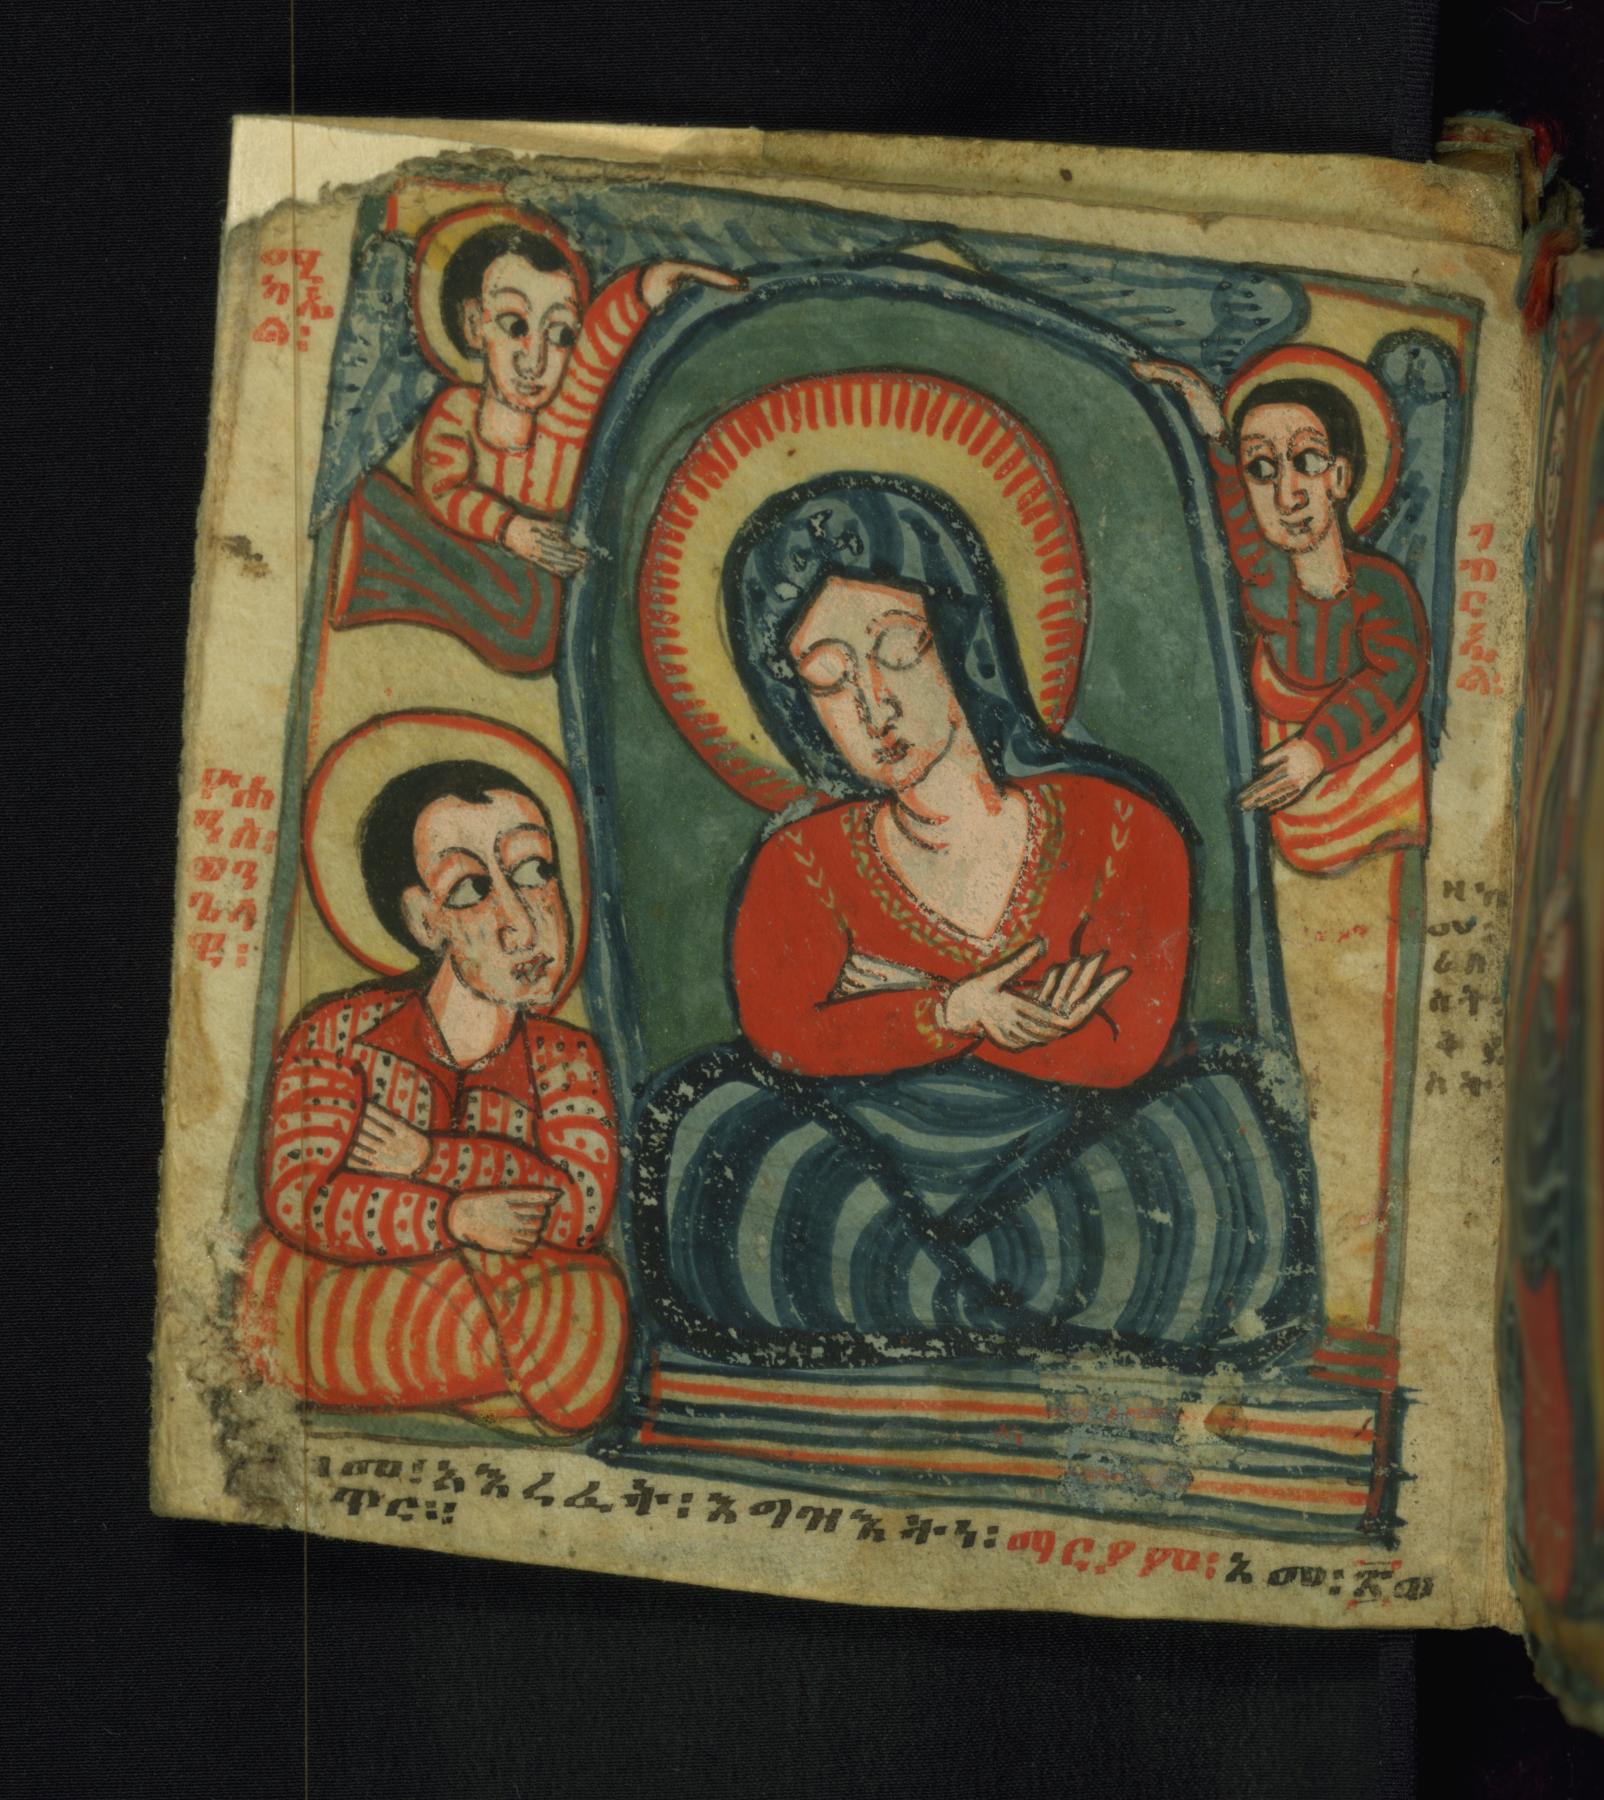 The Dormition and Assumption of Mary | The Walters Art Museum